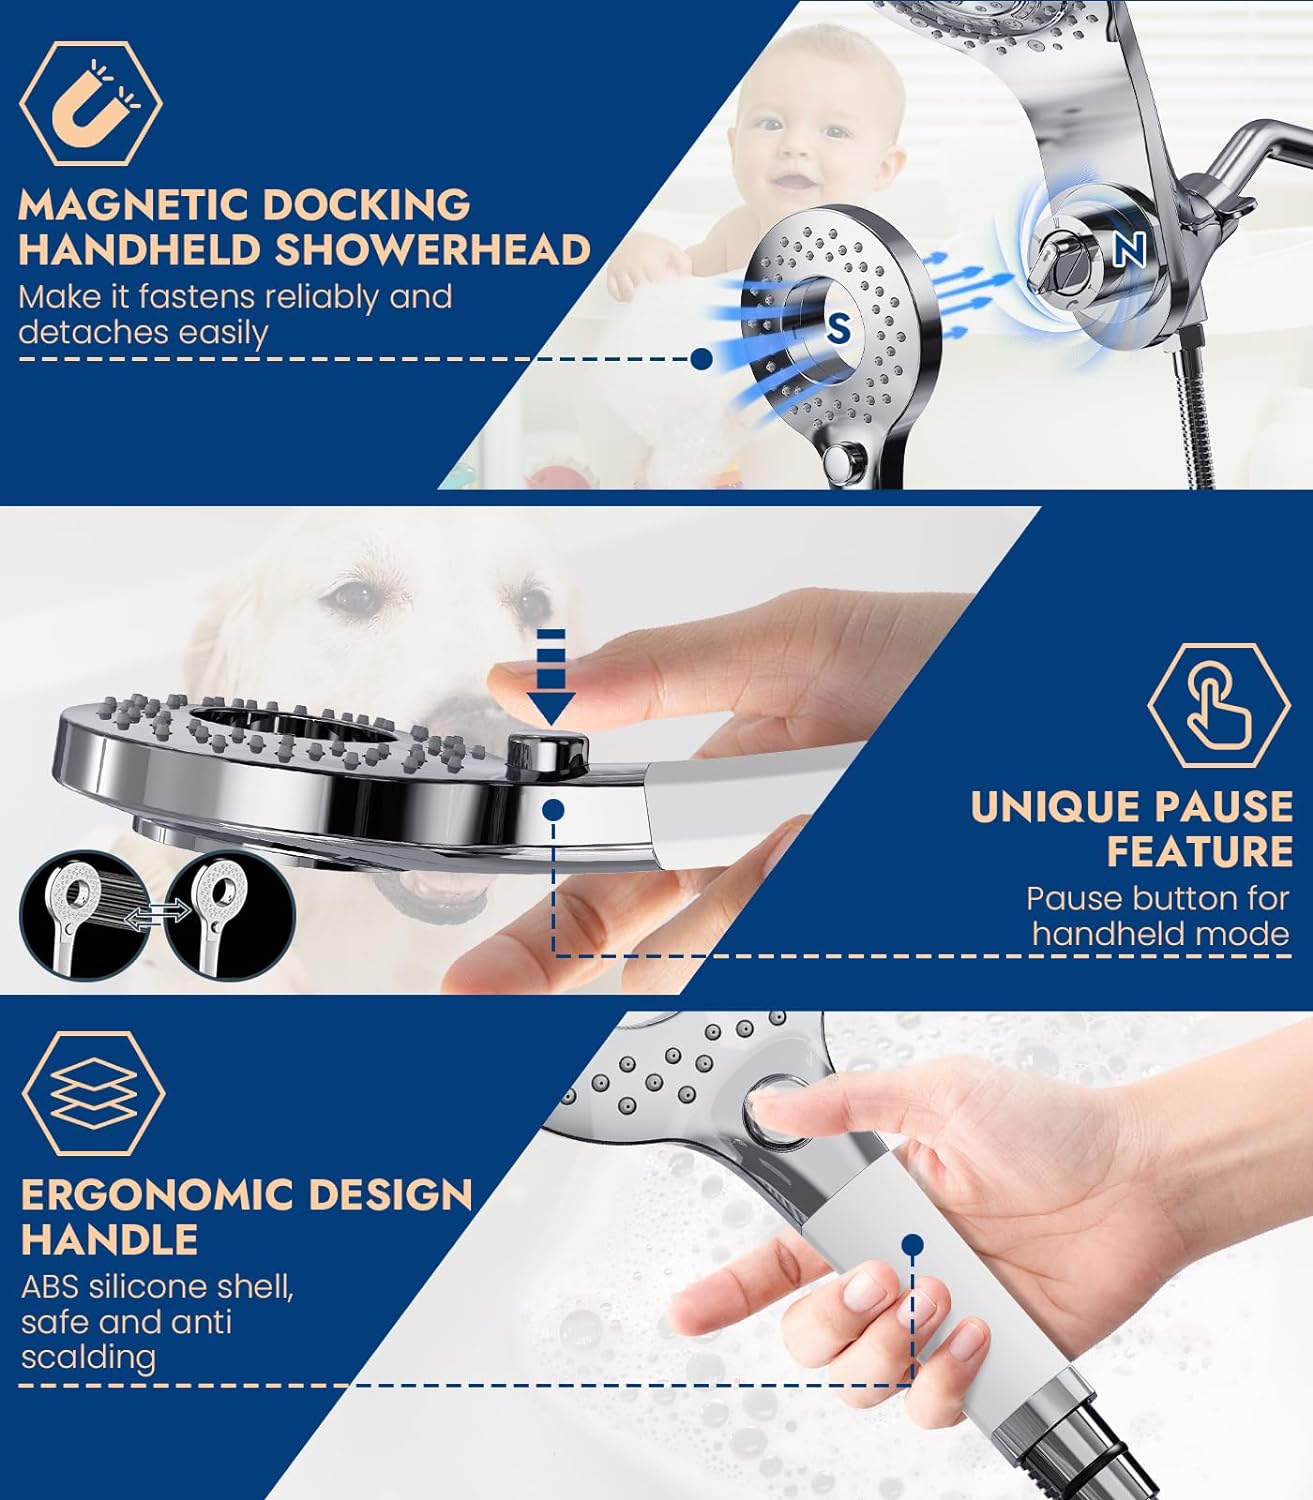 TWIMOST Dual Shower Head Combo: High Pressure 2 IN 1 Rainfall Shower Heads with Handheld Spray Combo - Magnetic Double Showerhead with 9 Spray Modes include 72 Stainless Steel Hose Brushed Nickel